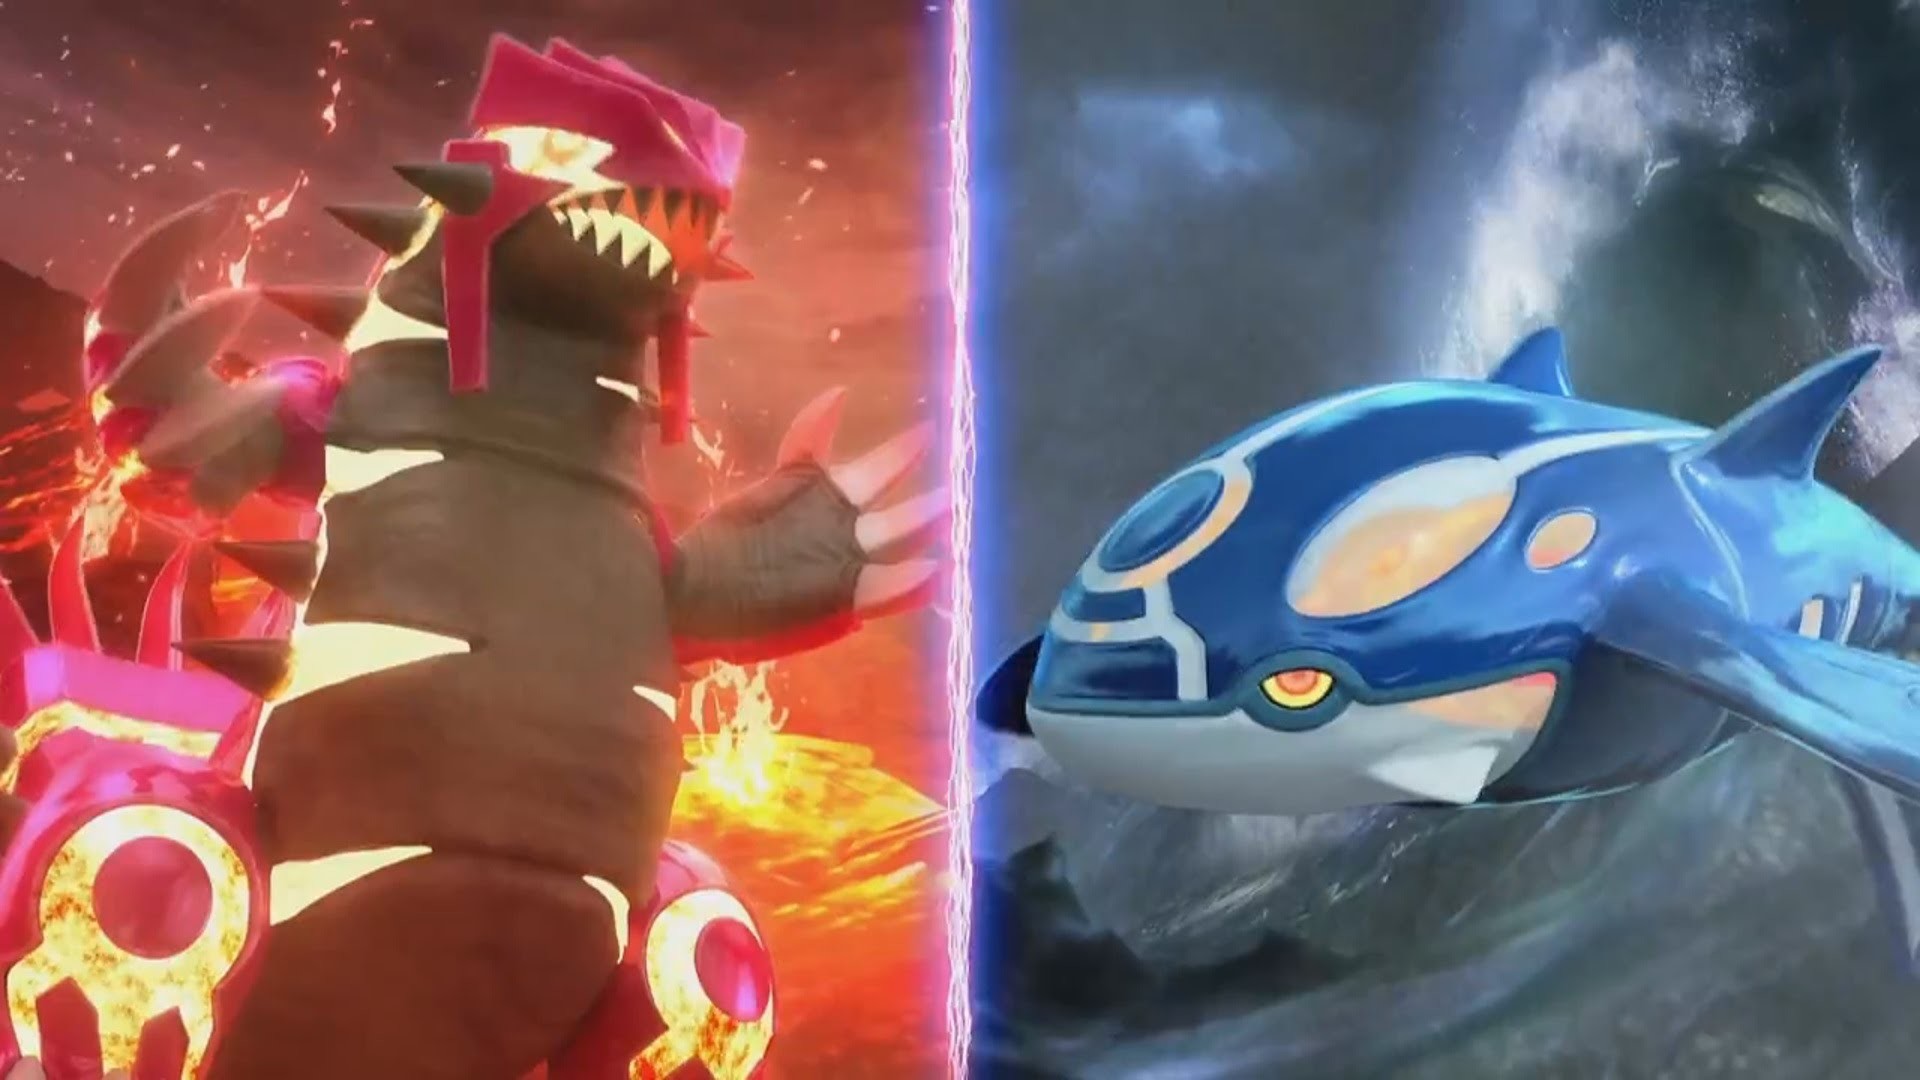 1920x1080 Pokemon Omega Ruby and Alpha Sapphire Trailer Footage + Primal Groudon and  Kyogre - YouTube